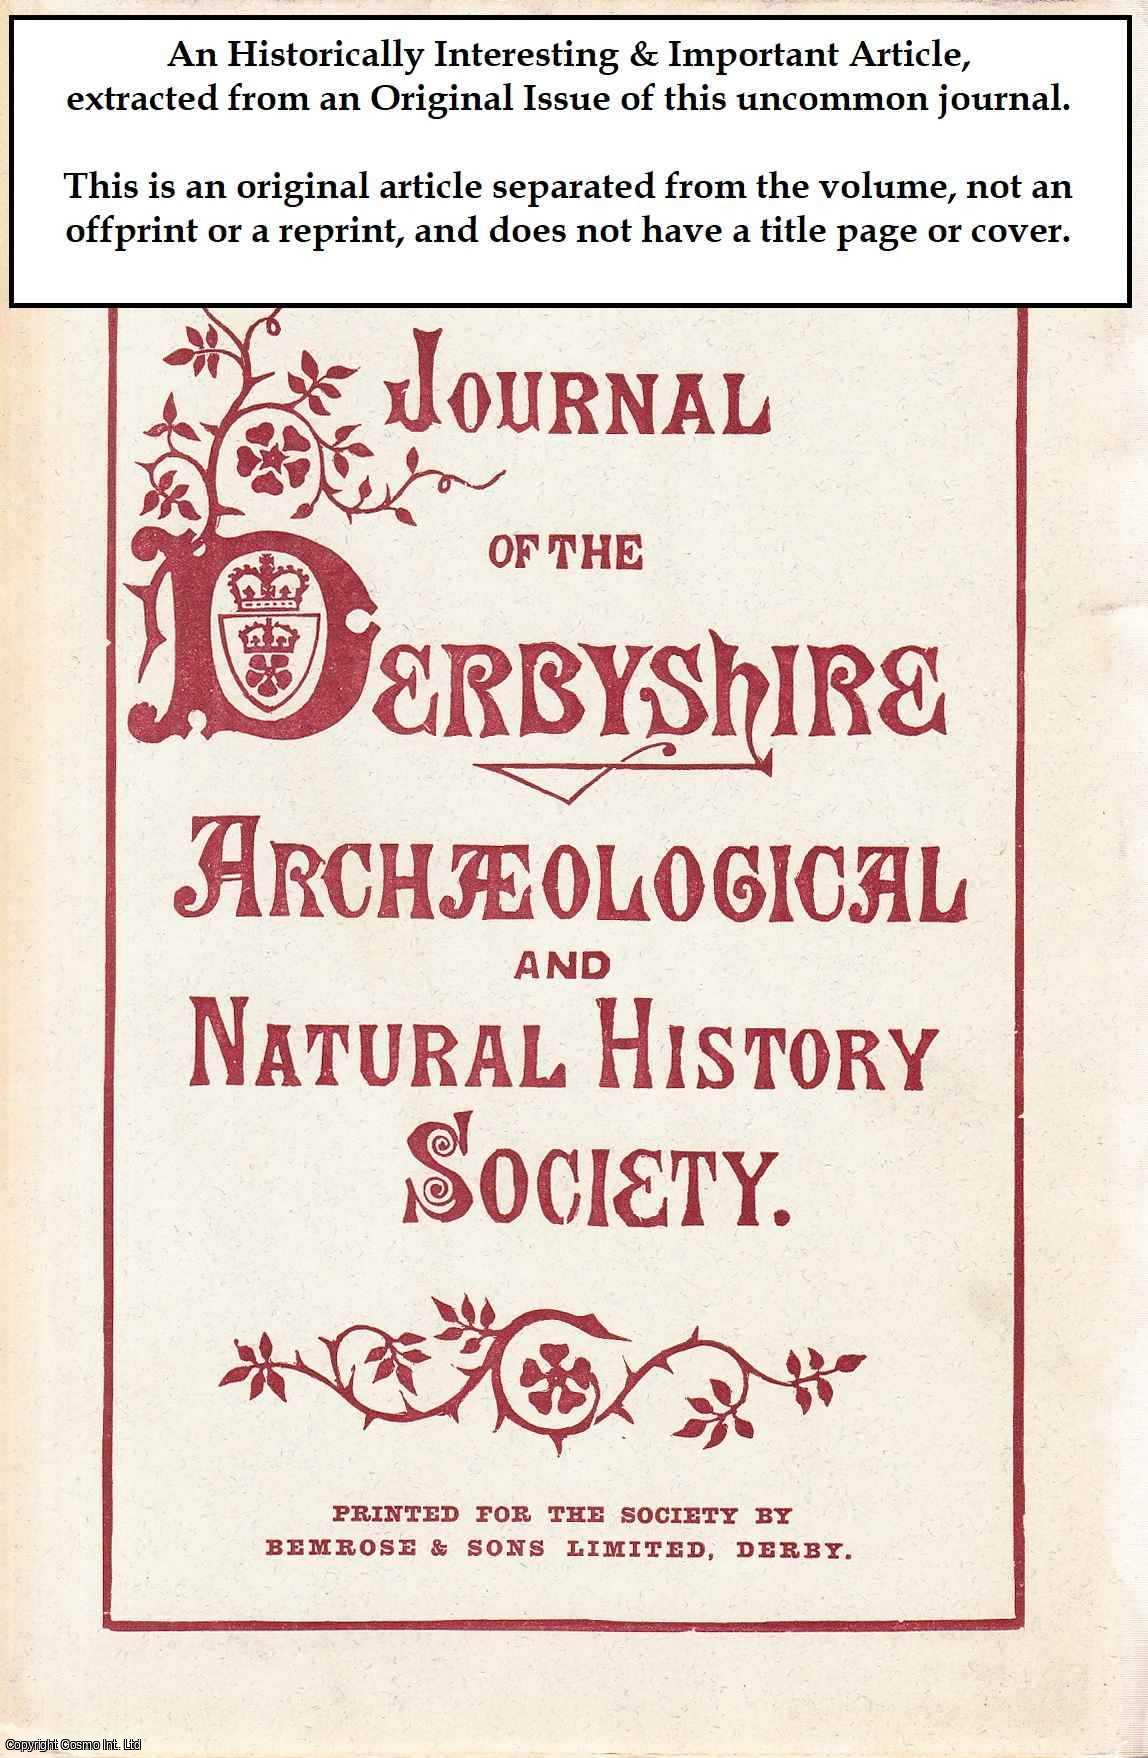 R. Jowett Burton - A Literal Transcript of The Earliest Register of Dale Abbey, Derbyshire. An original article from the Journal of the Derbyshire Archaeological & Natural History Society, 1900.